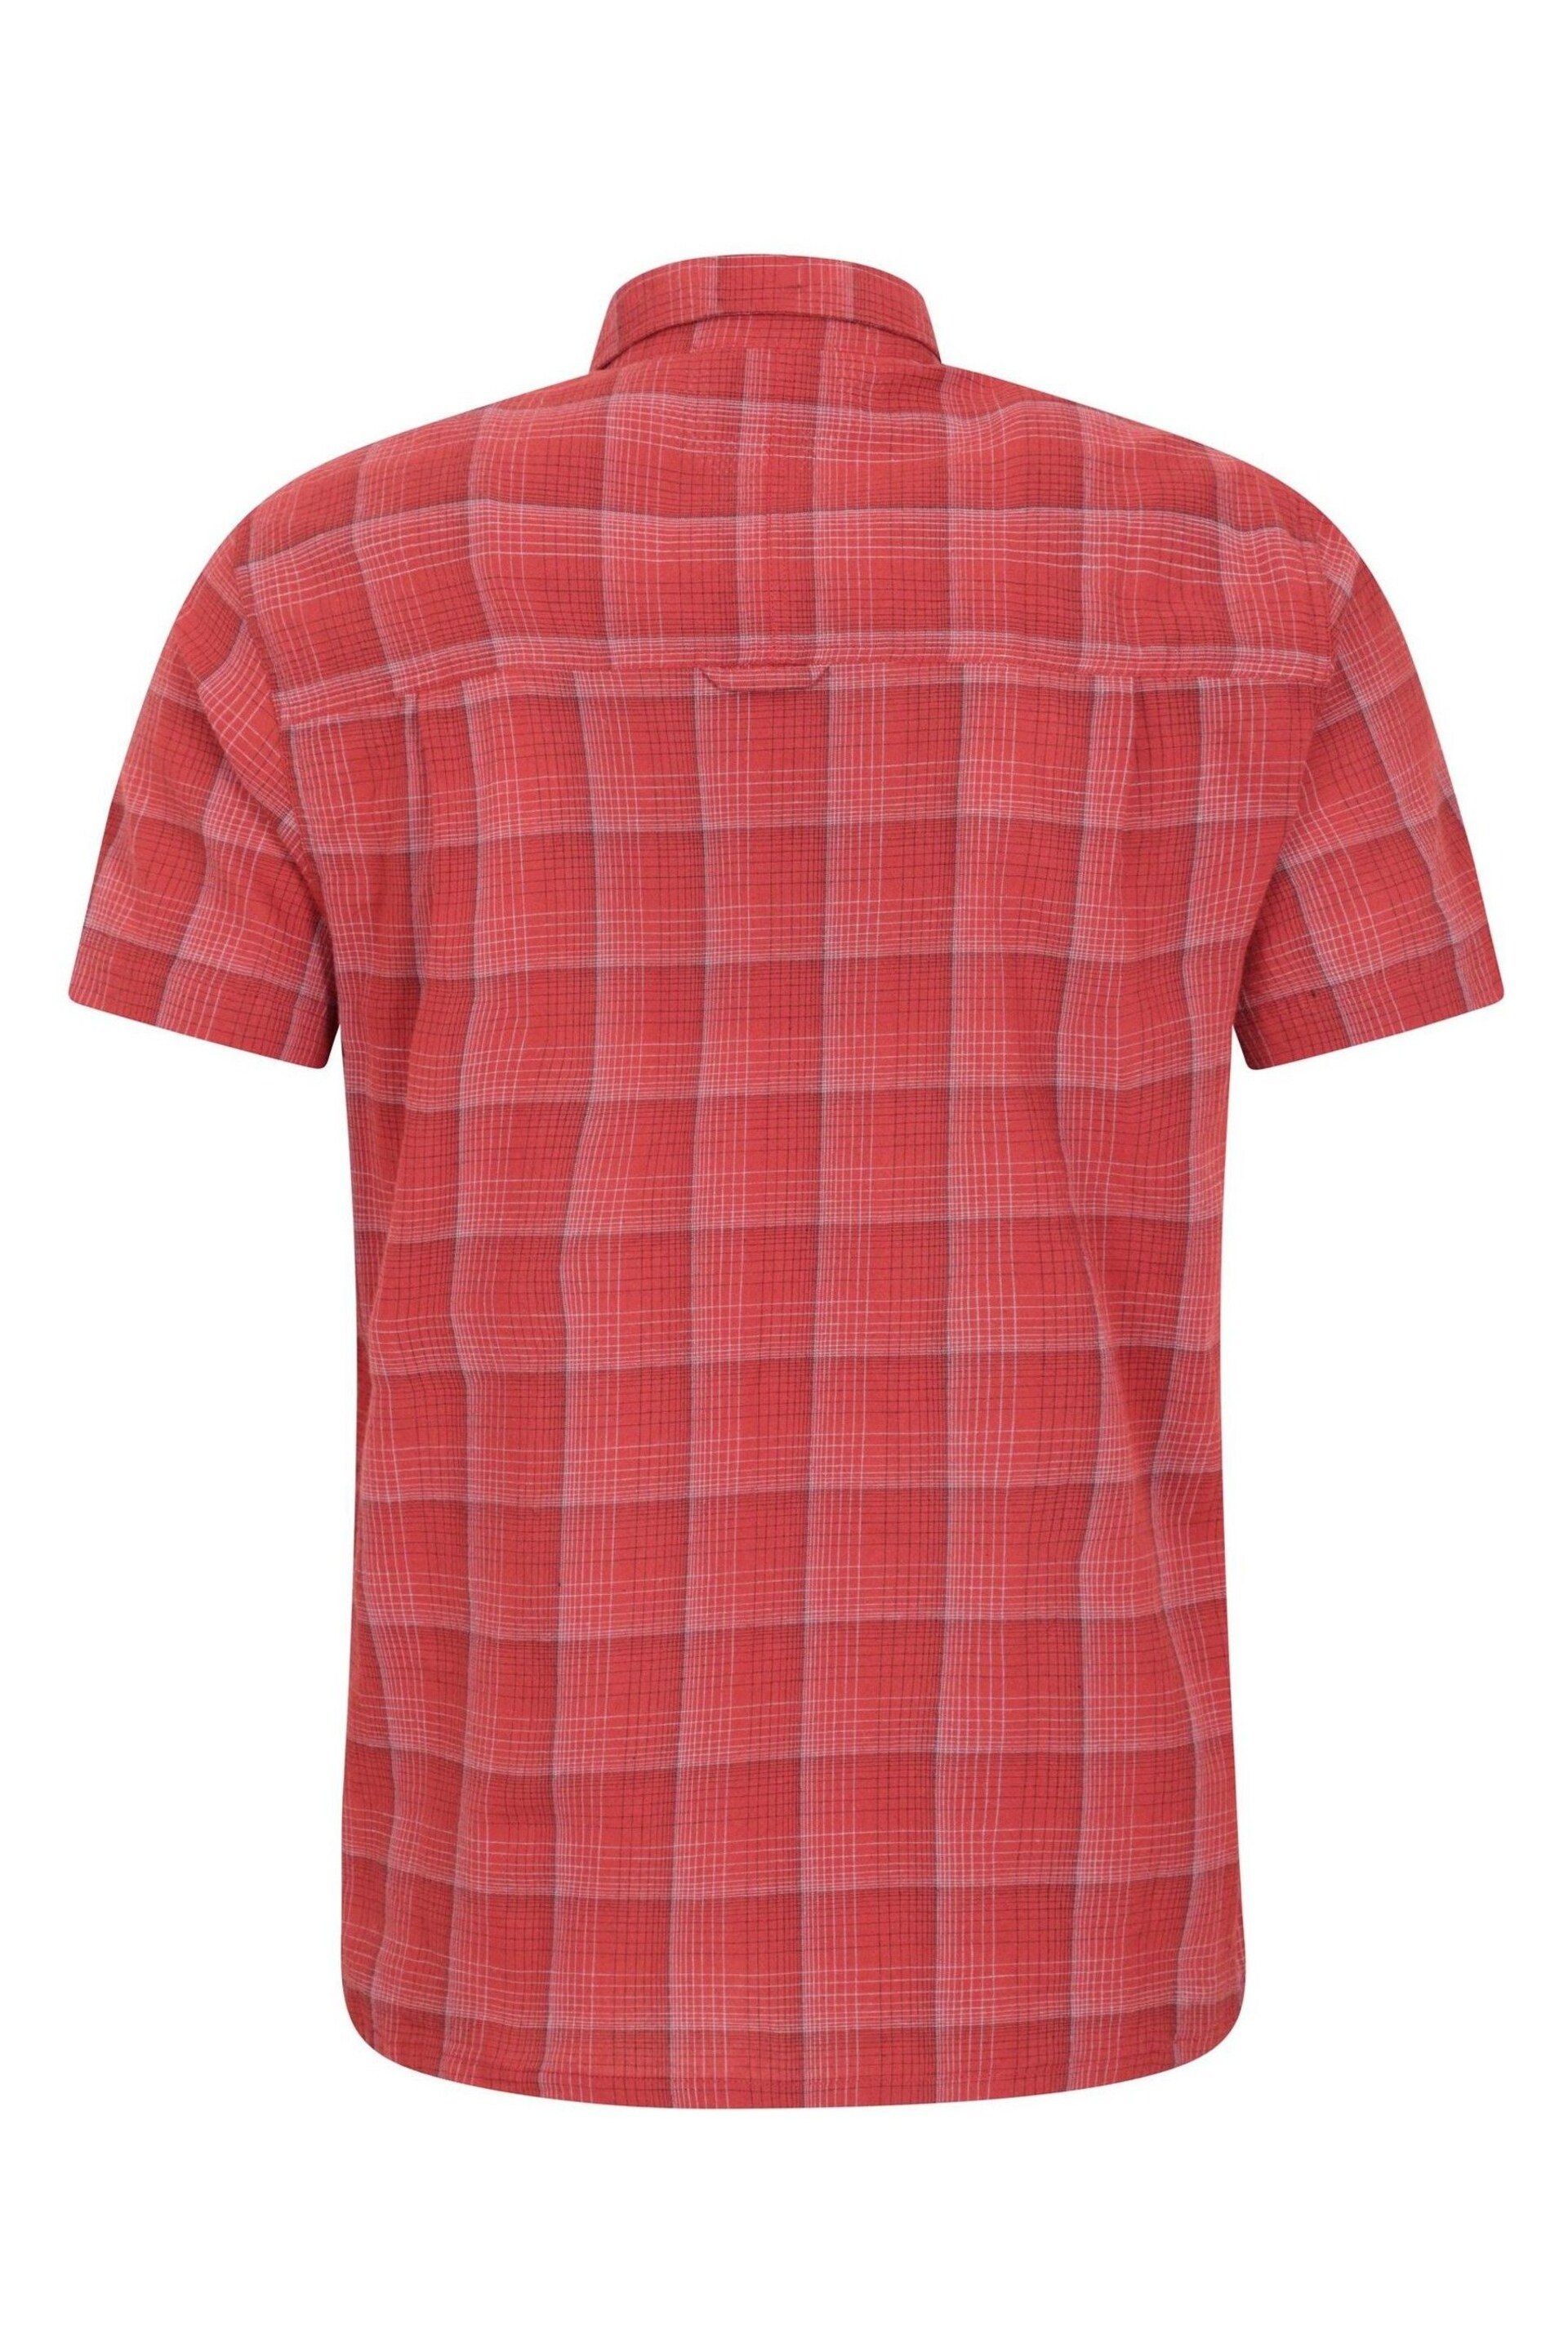 Mountain Warehouse Red Mens Holiday Cotton Shirt - Image 3 of 5